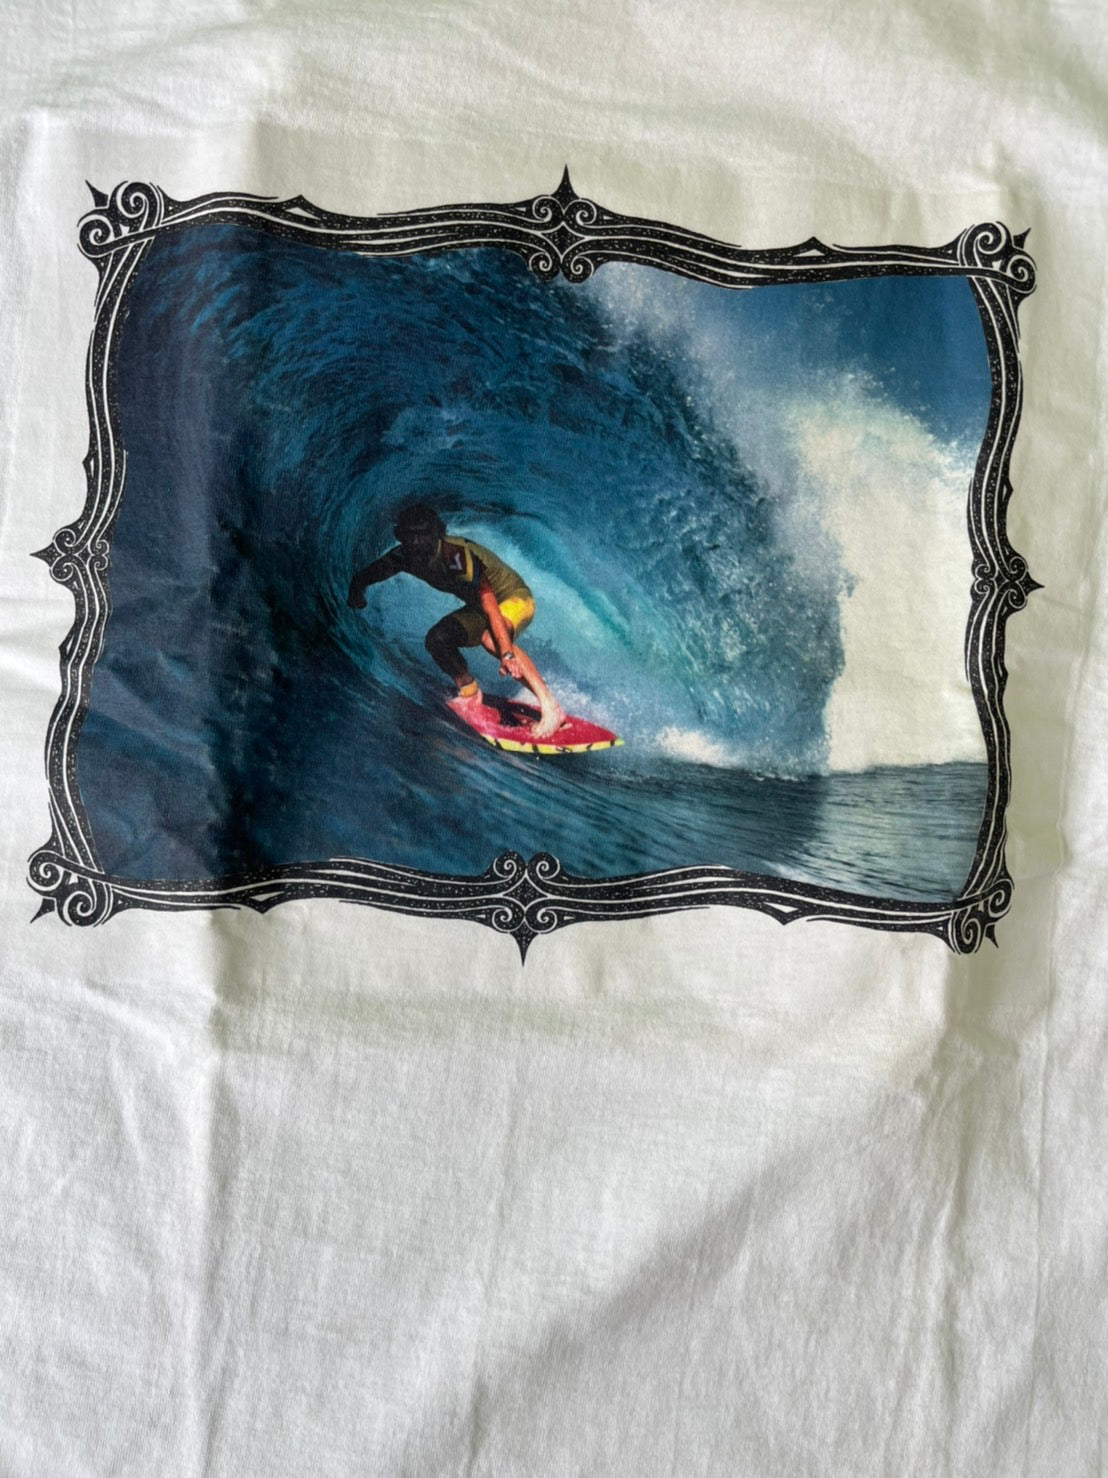 【vintage】90's Aaron Chang Surfing Photo Graphic T-shirt Made in USA（men's L)